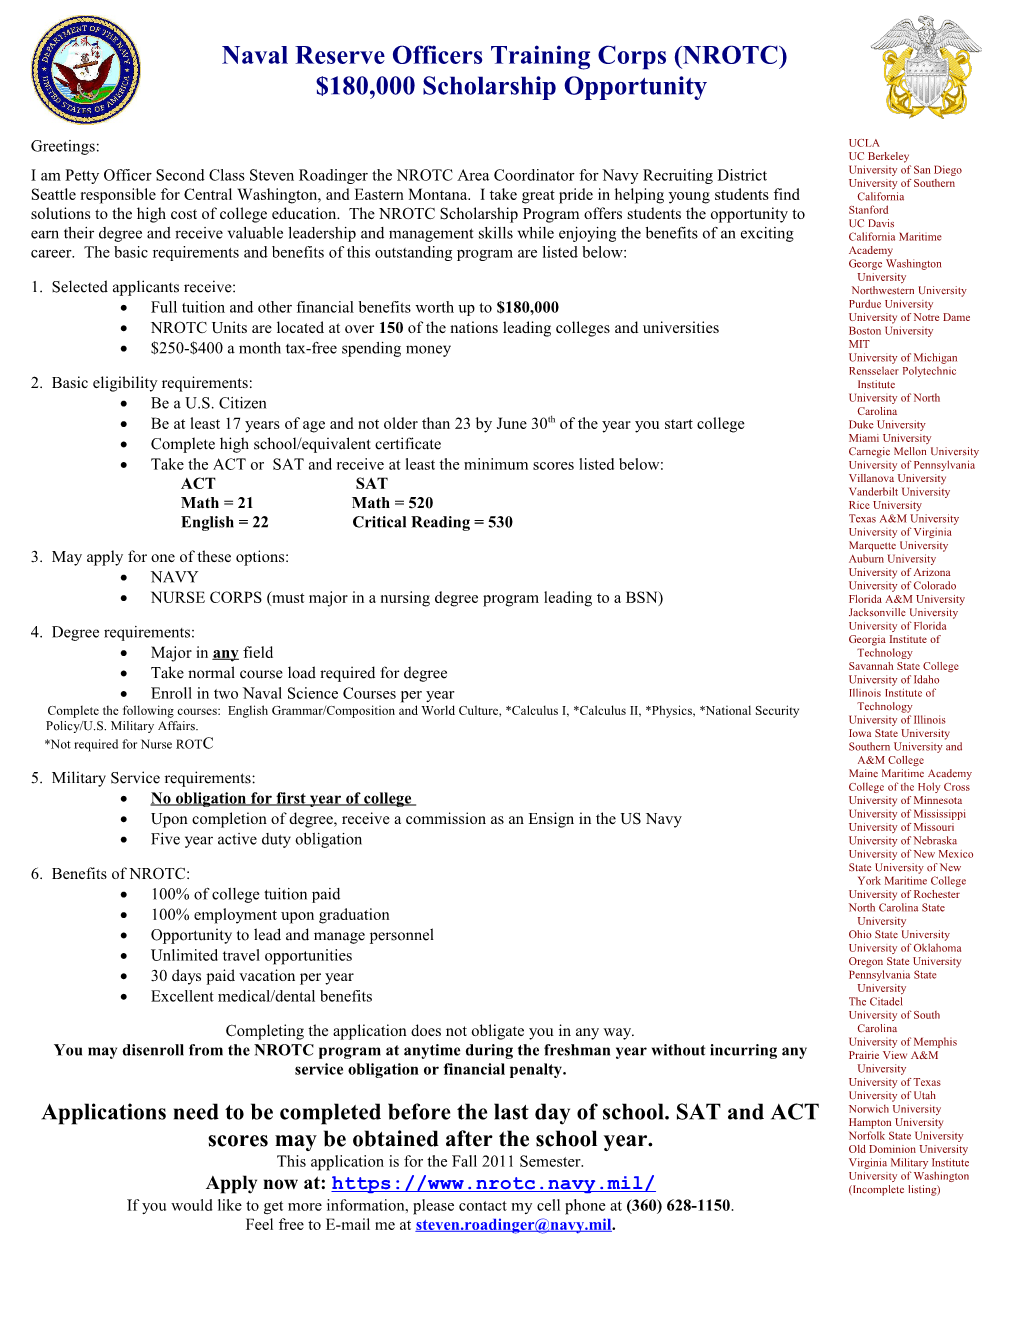 Naval Reserve Officers Training Corps (NROTC) $180,000 Scholarship Opportunity